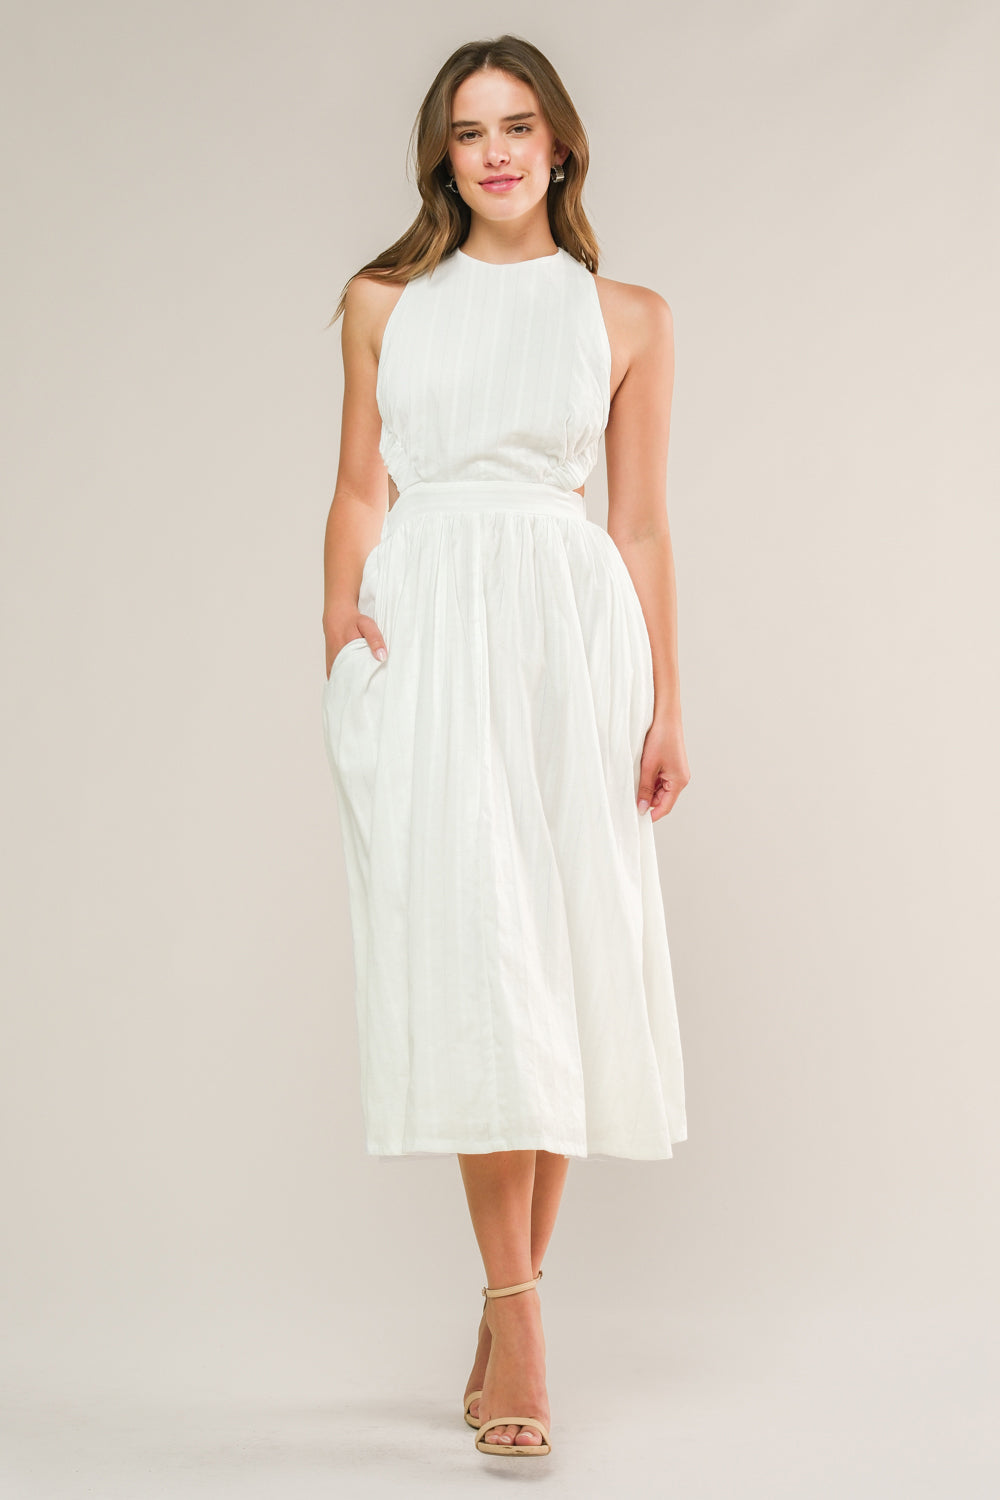 ADMIRED FROM AFAR WOVEN MIDI DRESS